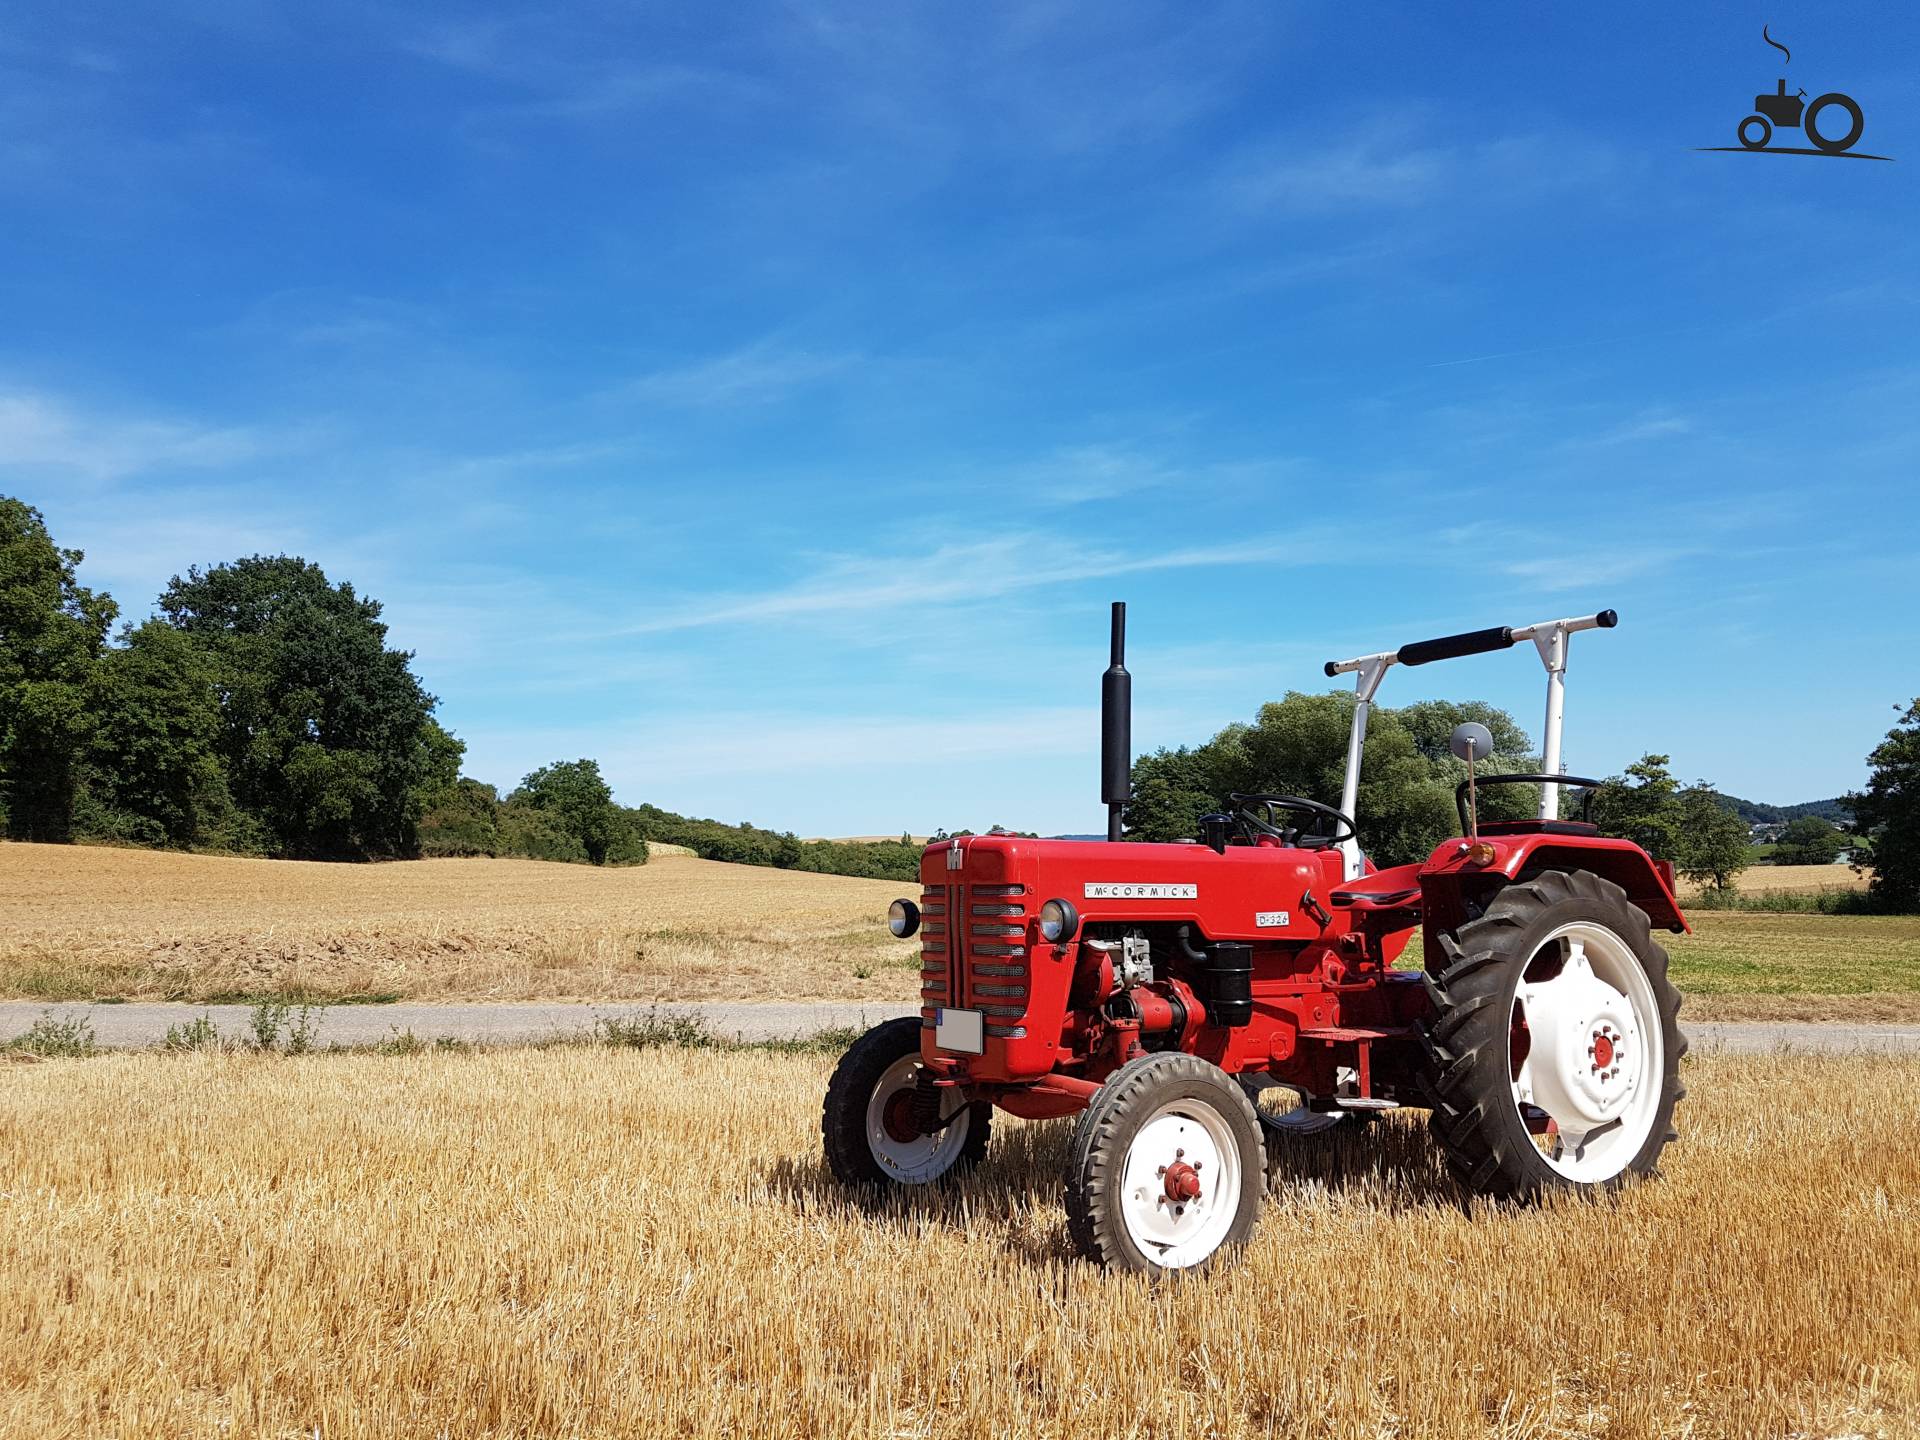 Picture of my McCormick D-326 on a stubble field after the harvest.